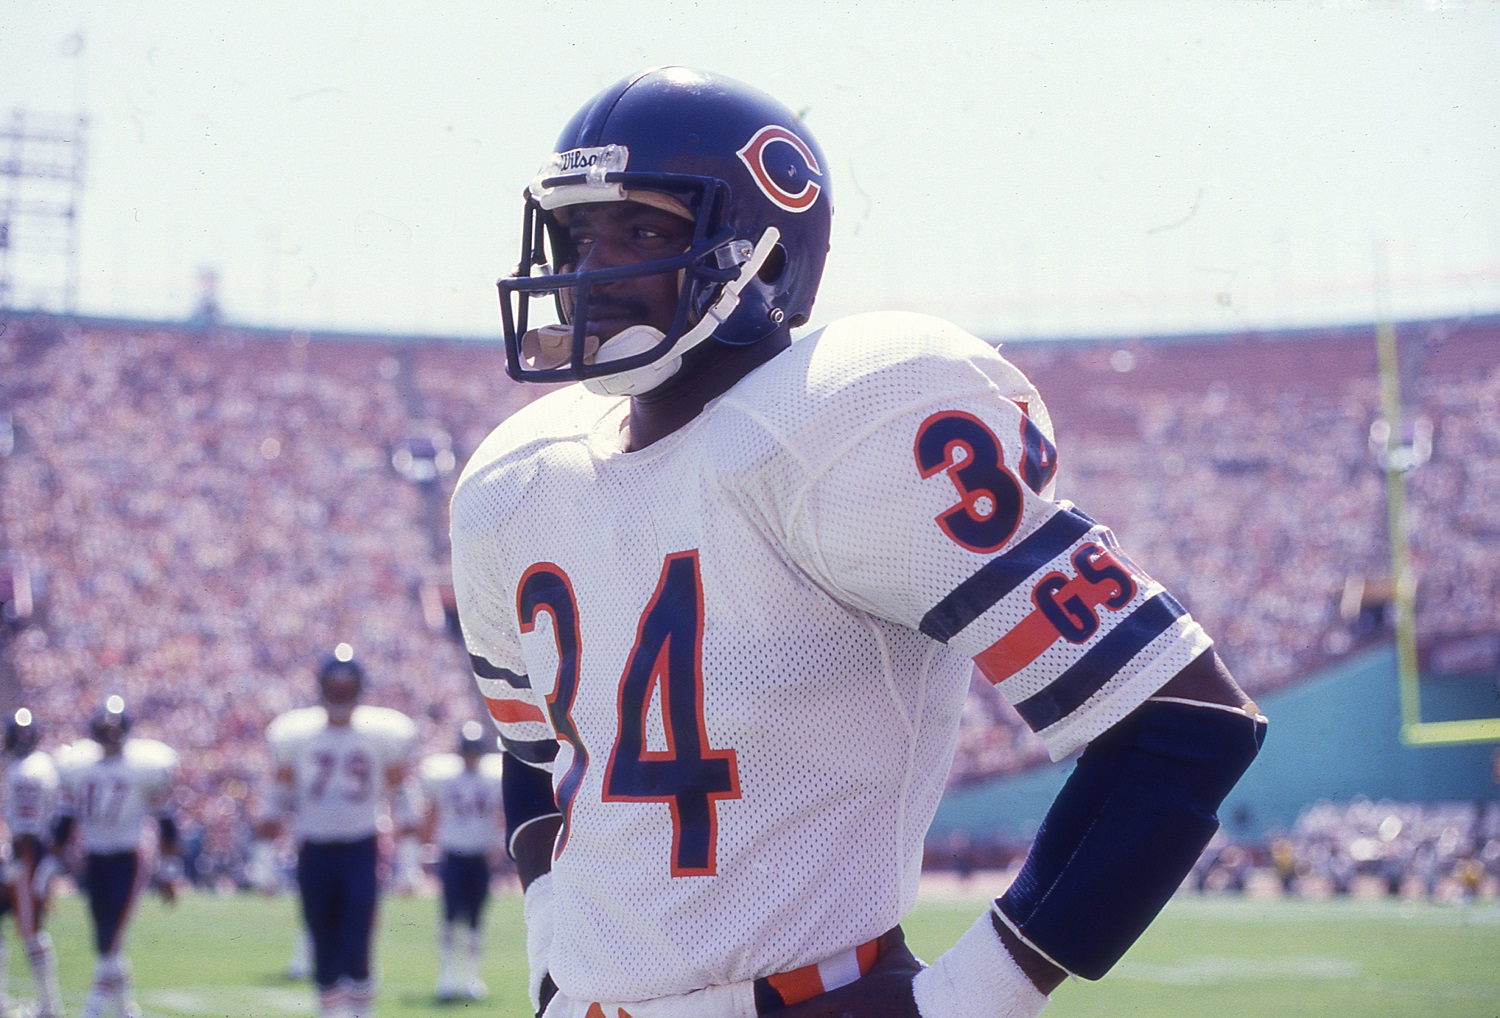 Walter Payton Had His Own ‘Flu Game’ and Broke an NFL Record Previously Held by O.J. Simpson